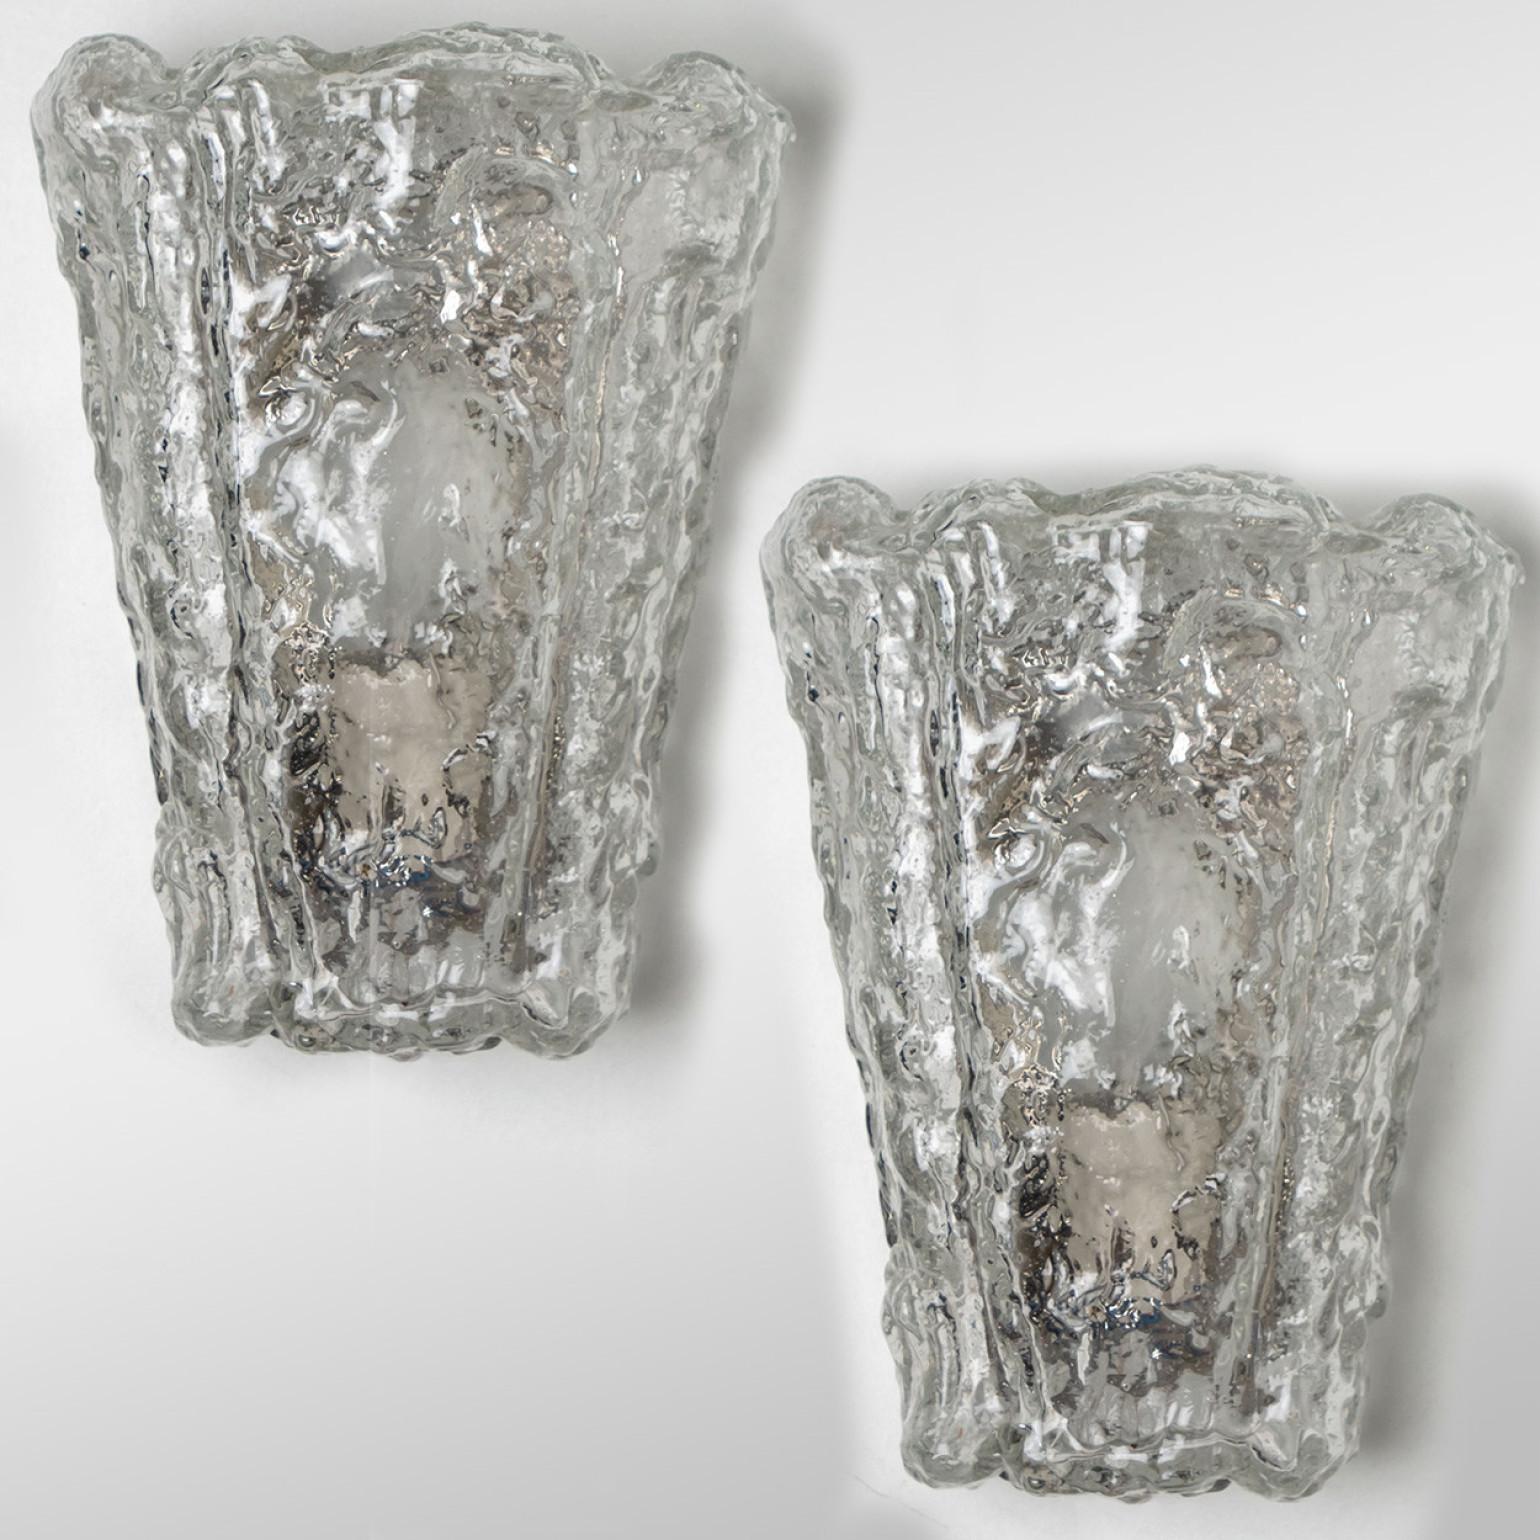 Pair of wall sconces by Hillebrand. Made in Germany around 1960.
The glass shade looks like a clear piece of rock. The glass refracts the light beautifully, filling a room with a soft glow.
The wall light features a black back plate and chrome